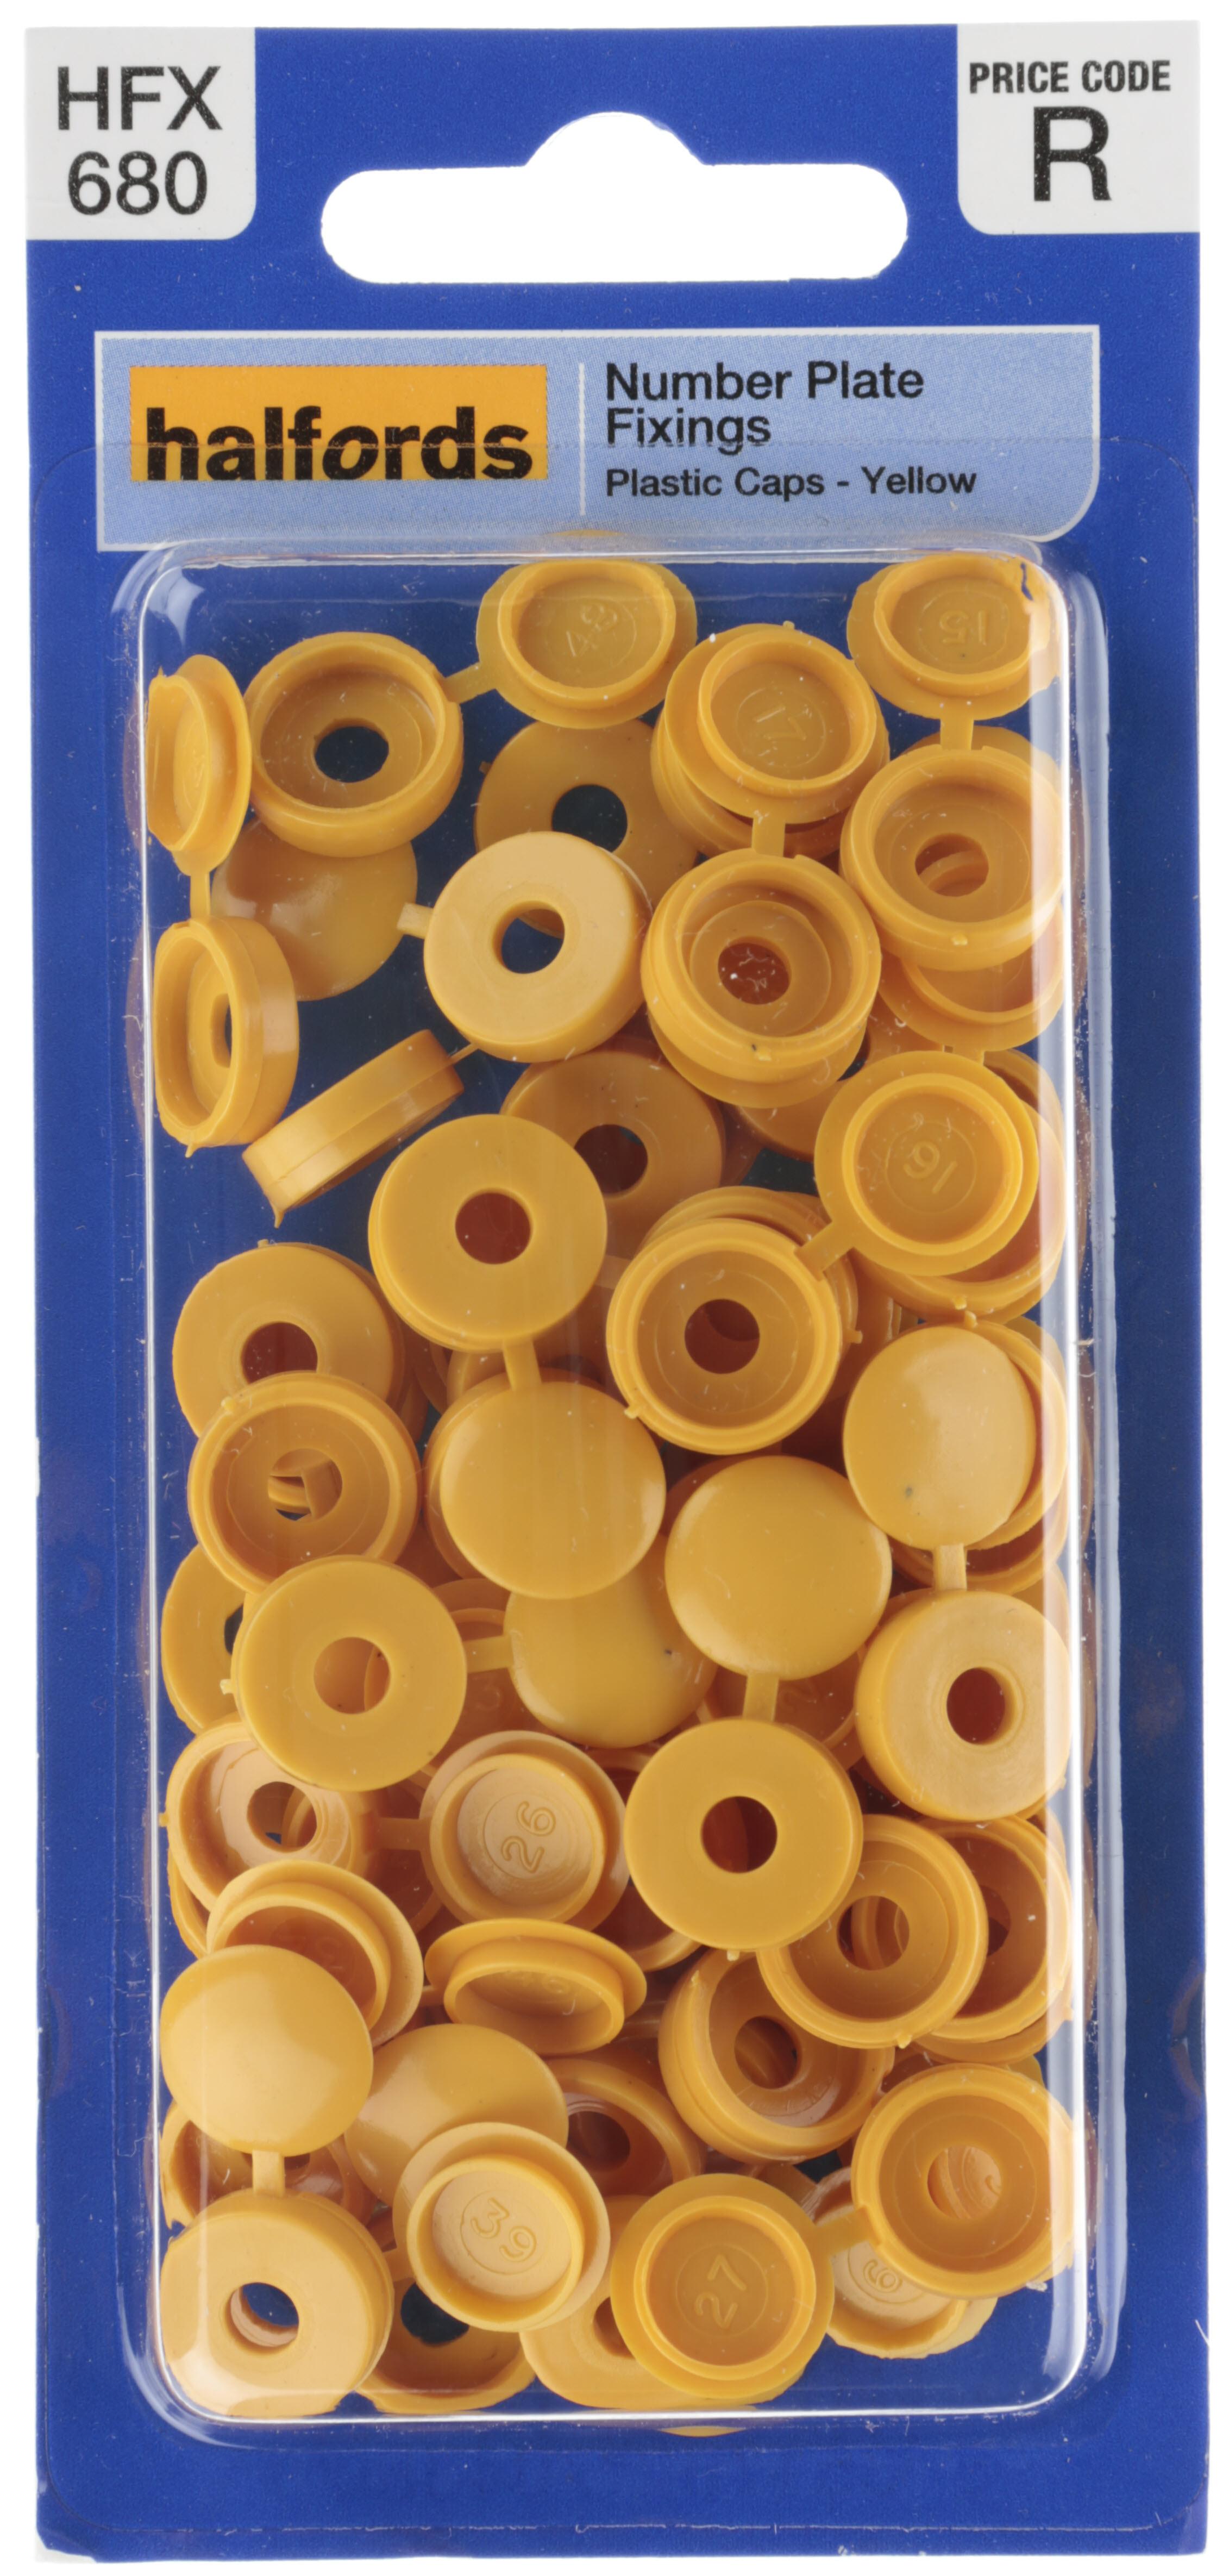 Halfords Number Plate Plastic Caps Yellow (Hfx680)